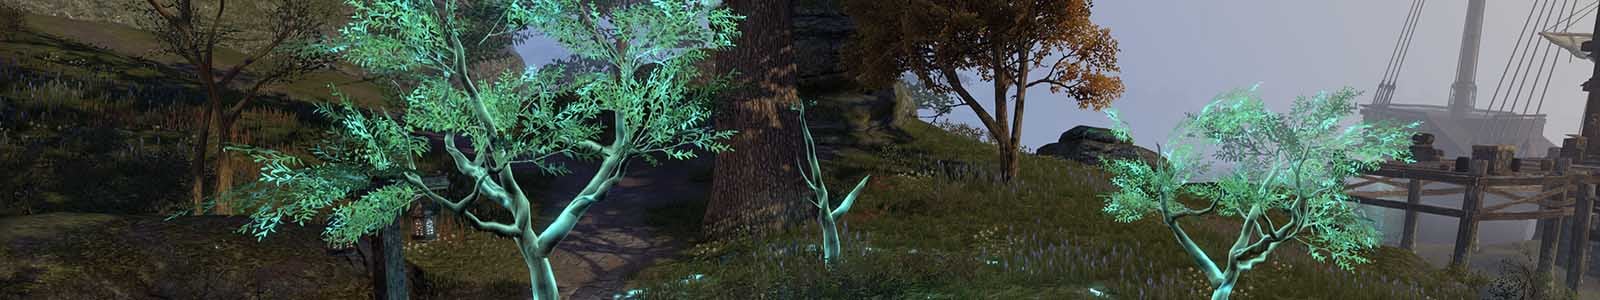 Secluded Grove Skill - ESO header